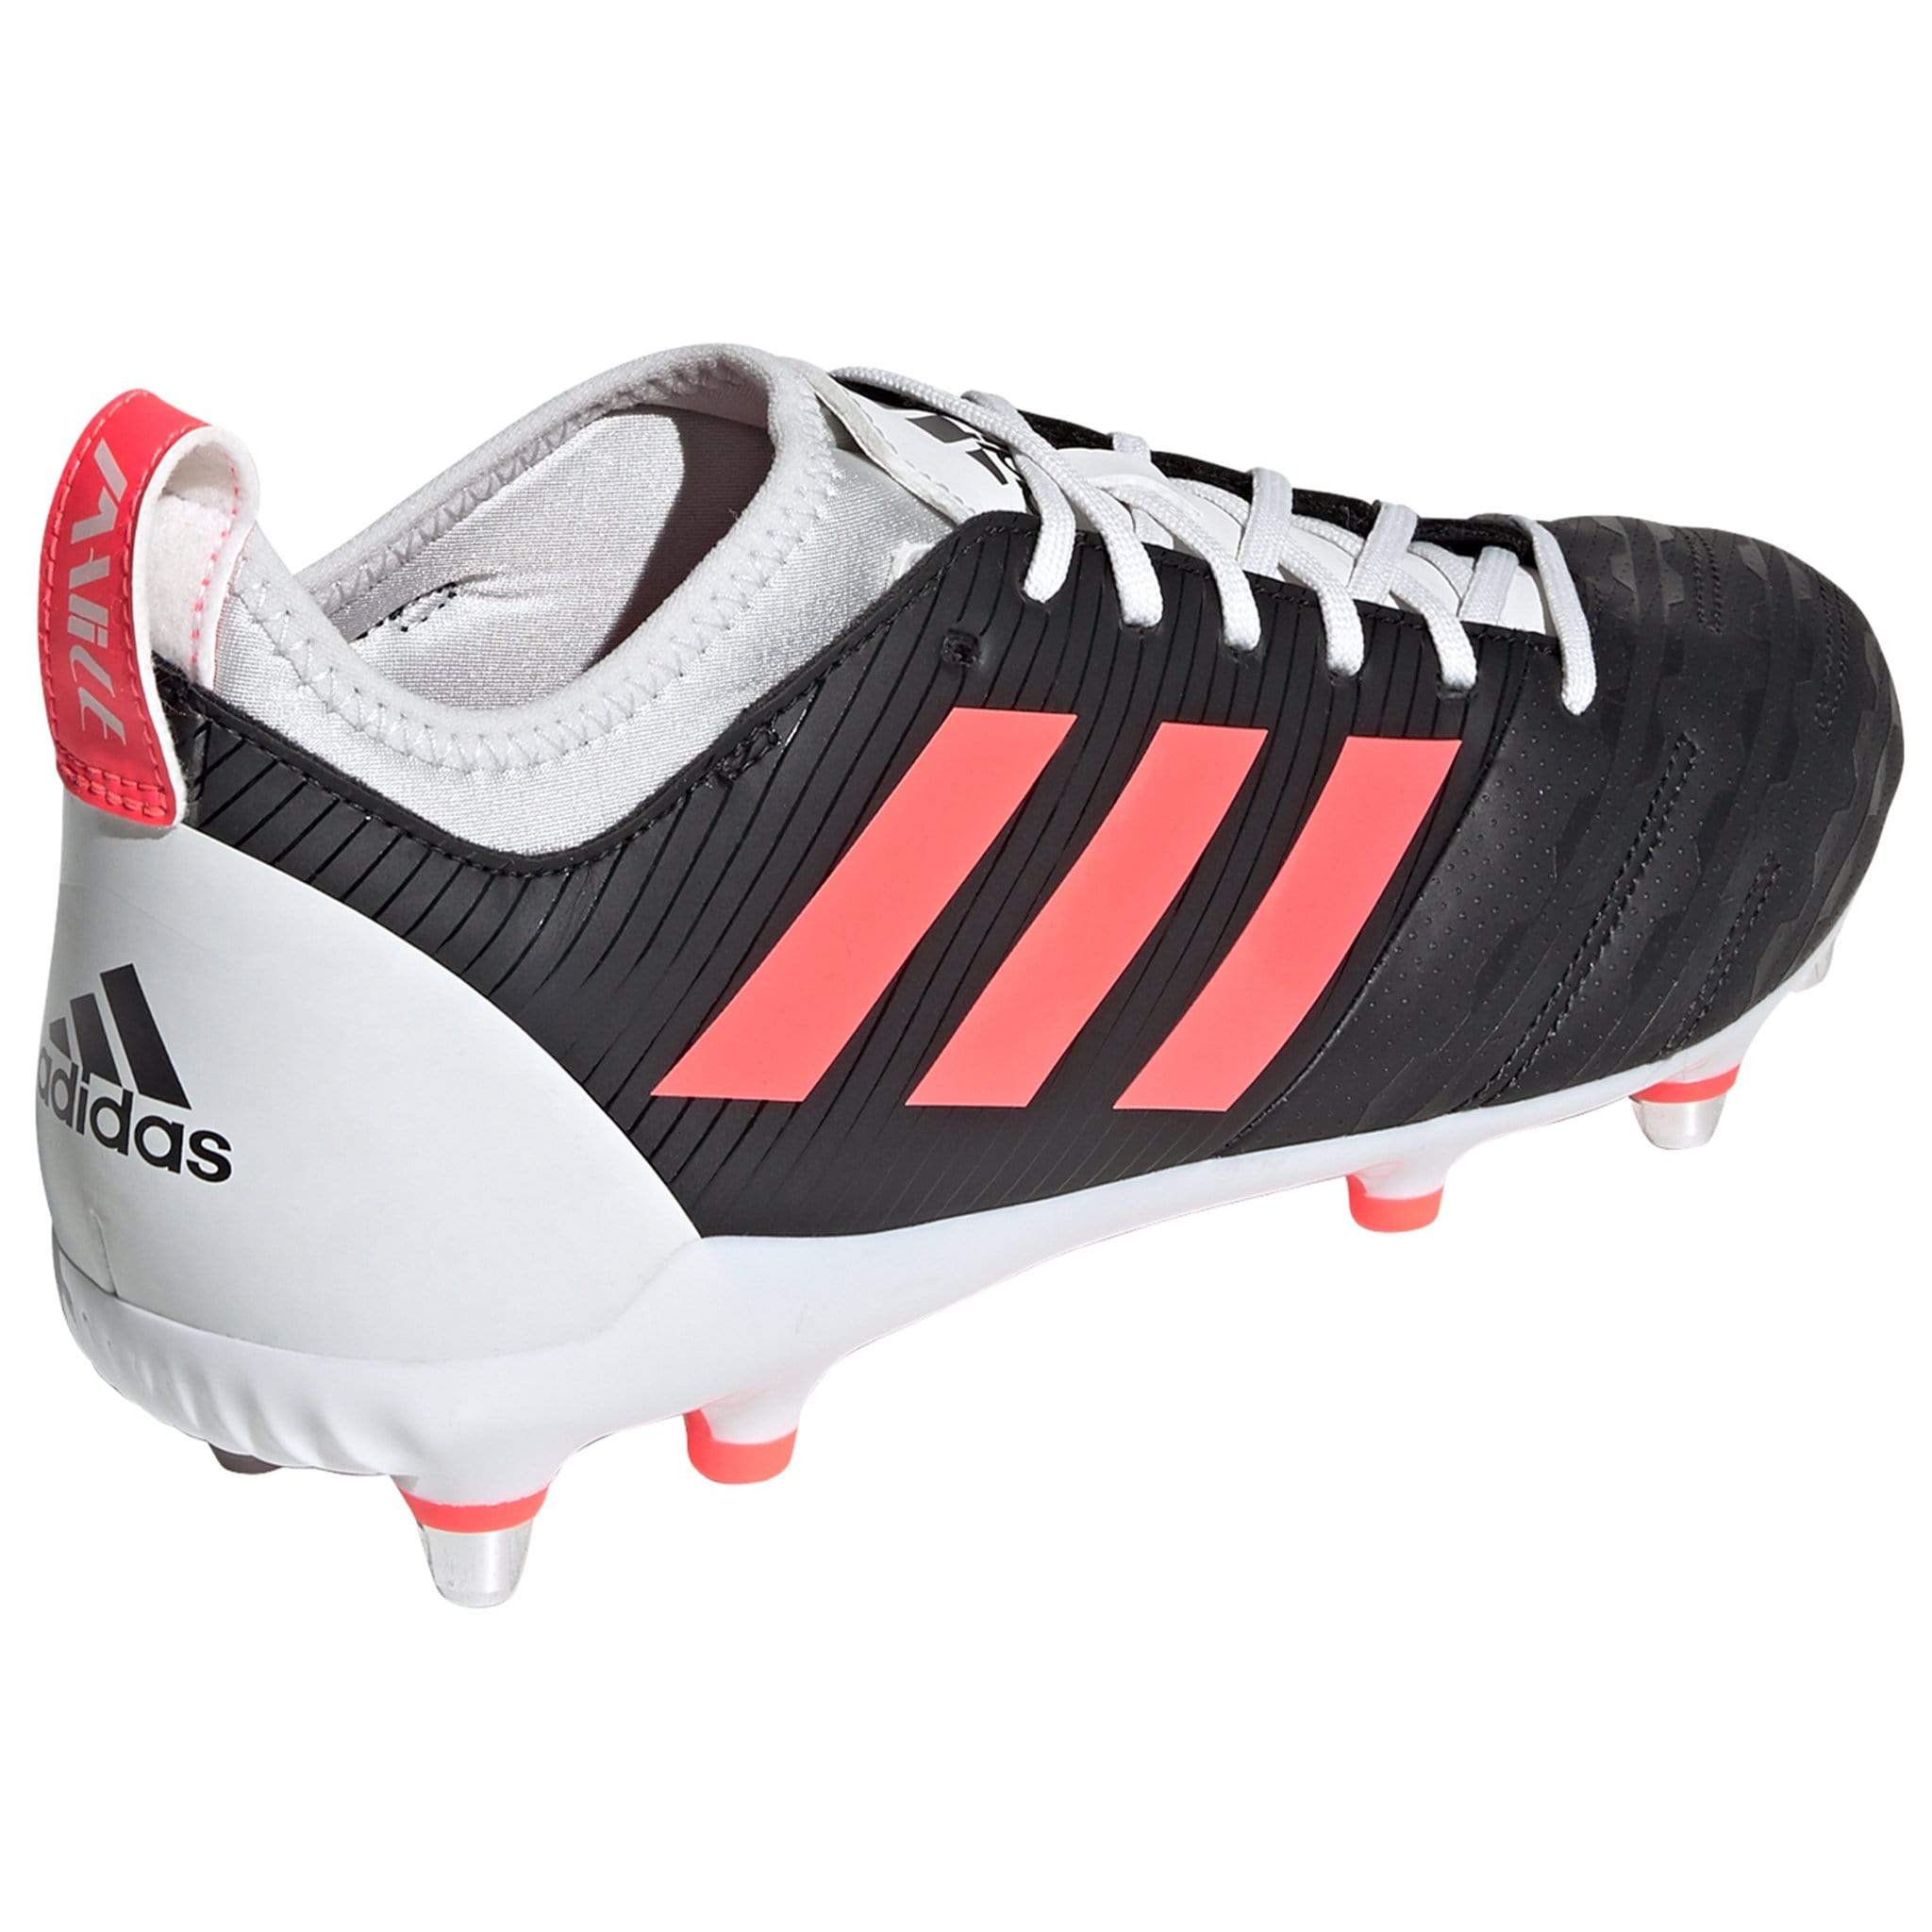 new adidas rugby boots 219